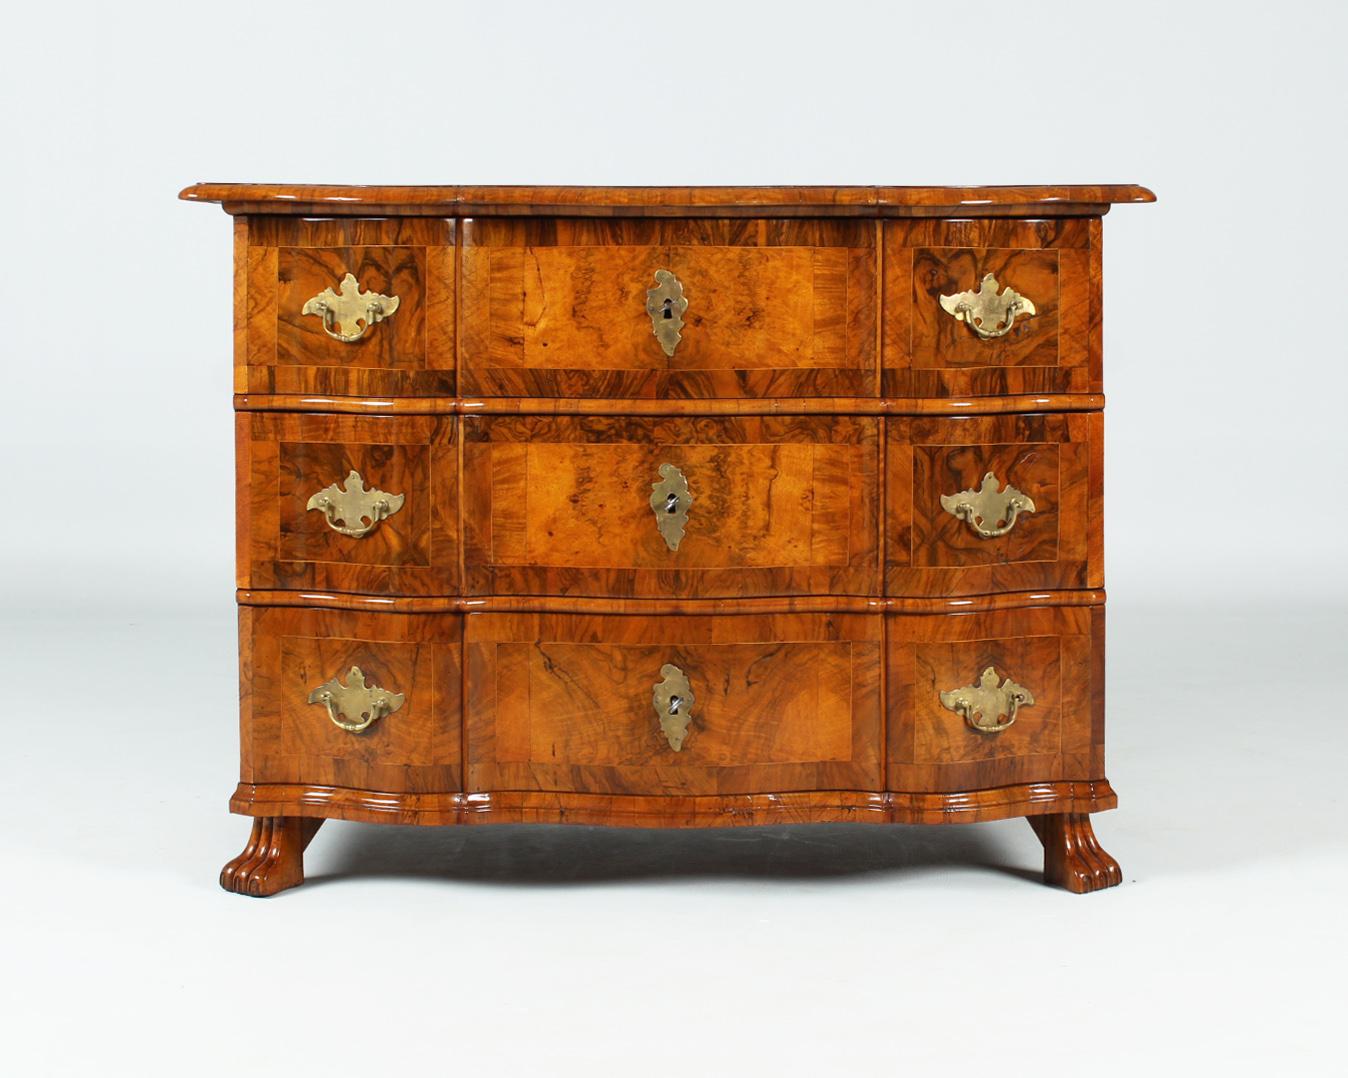 Antique Baroque Commode with Marquetry

Central German
Walnut a.o.
Baroque around 1760

Dimensions: H x W x D: 85 x 116 x 66 cm

Description:
Three-bay piece of furniture standing on feet worked out as lion's paws.

Very elegant furniture